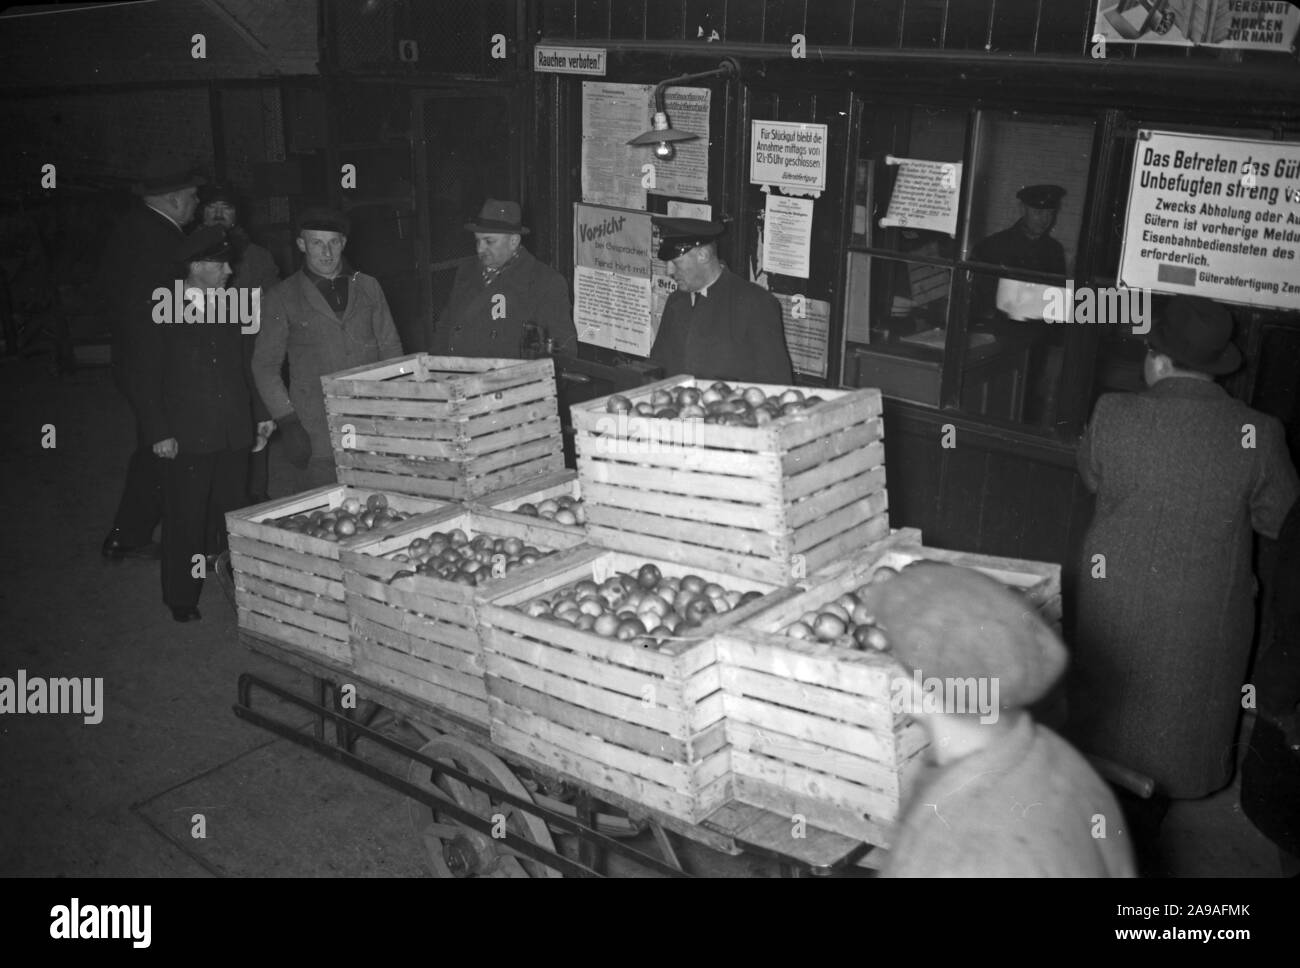 People shopping at the market in Karlsbad, 1930s. Stock Photo